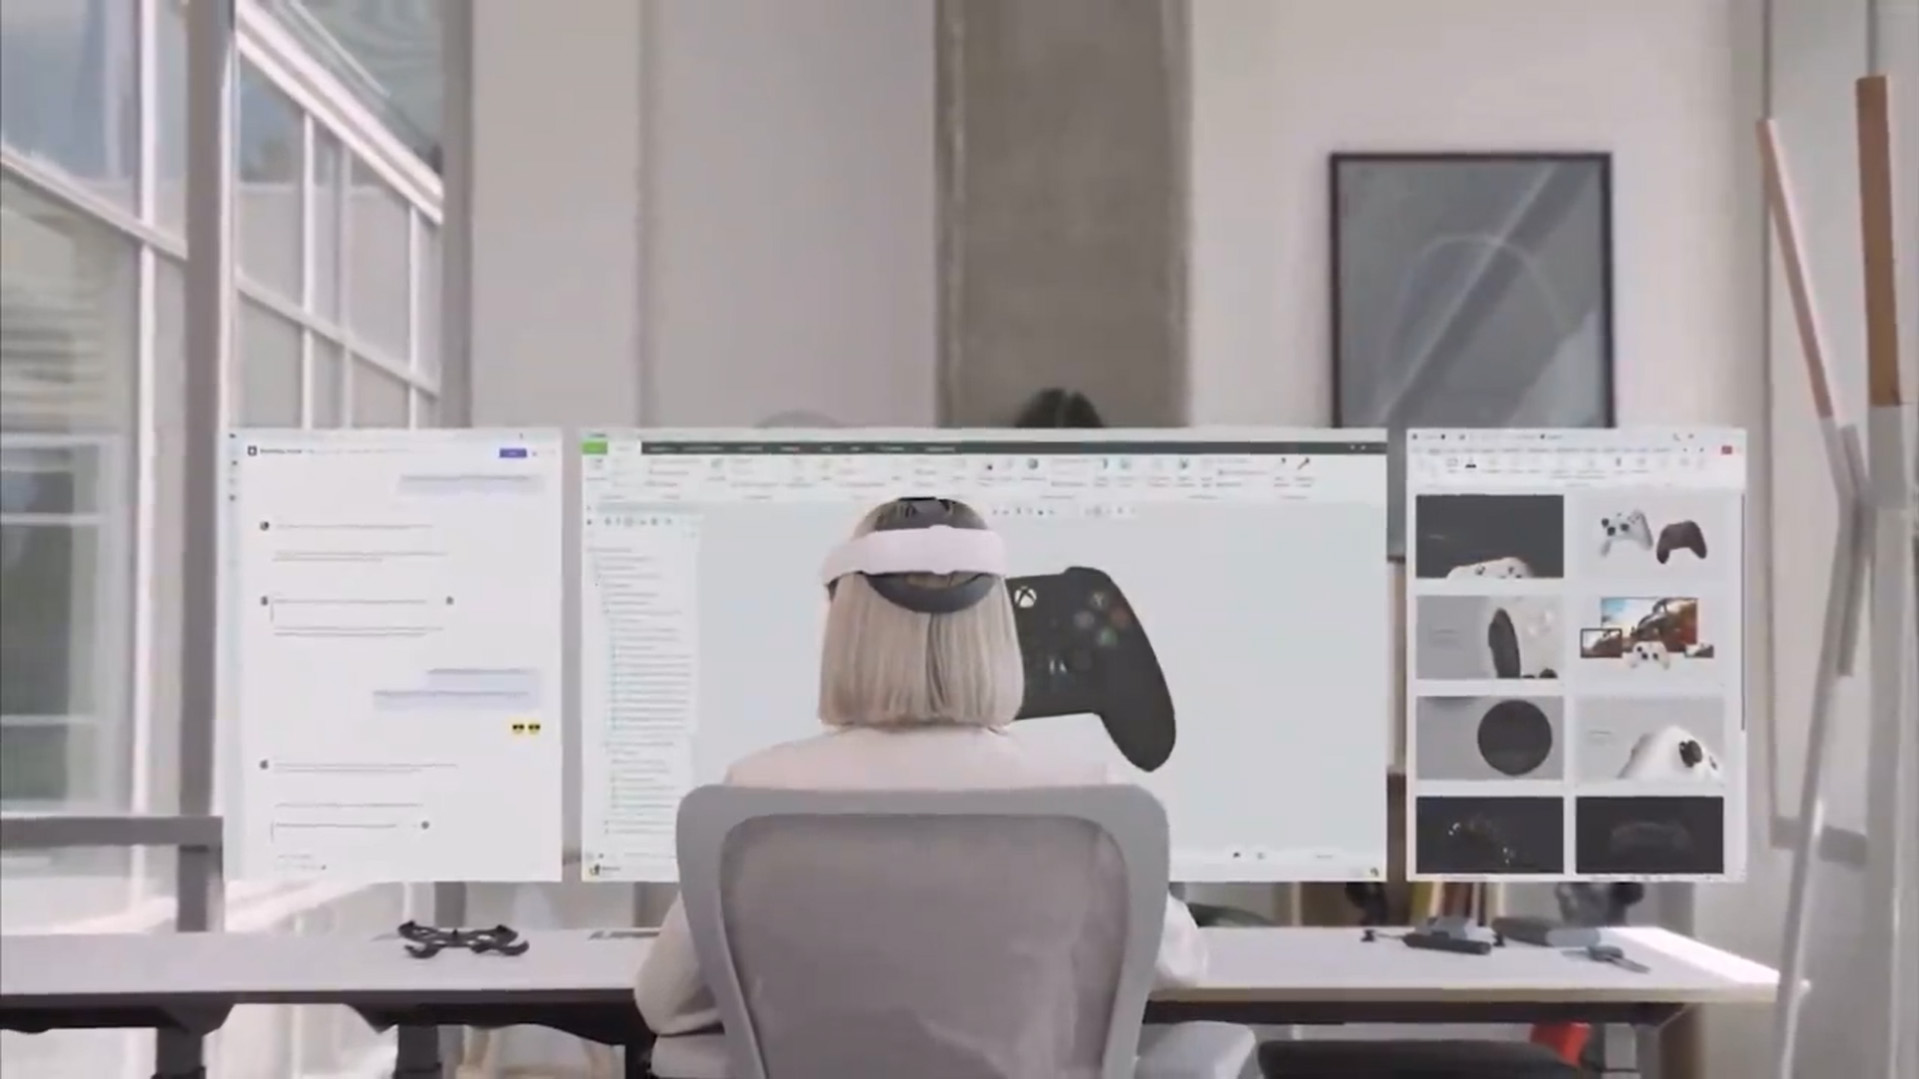 Screenshots taken from a presentation of designing an Xbox controller in Creo with Windows Volumetric Apps